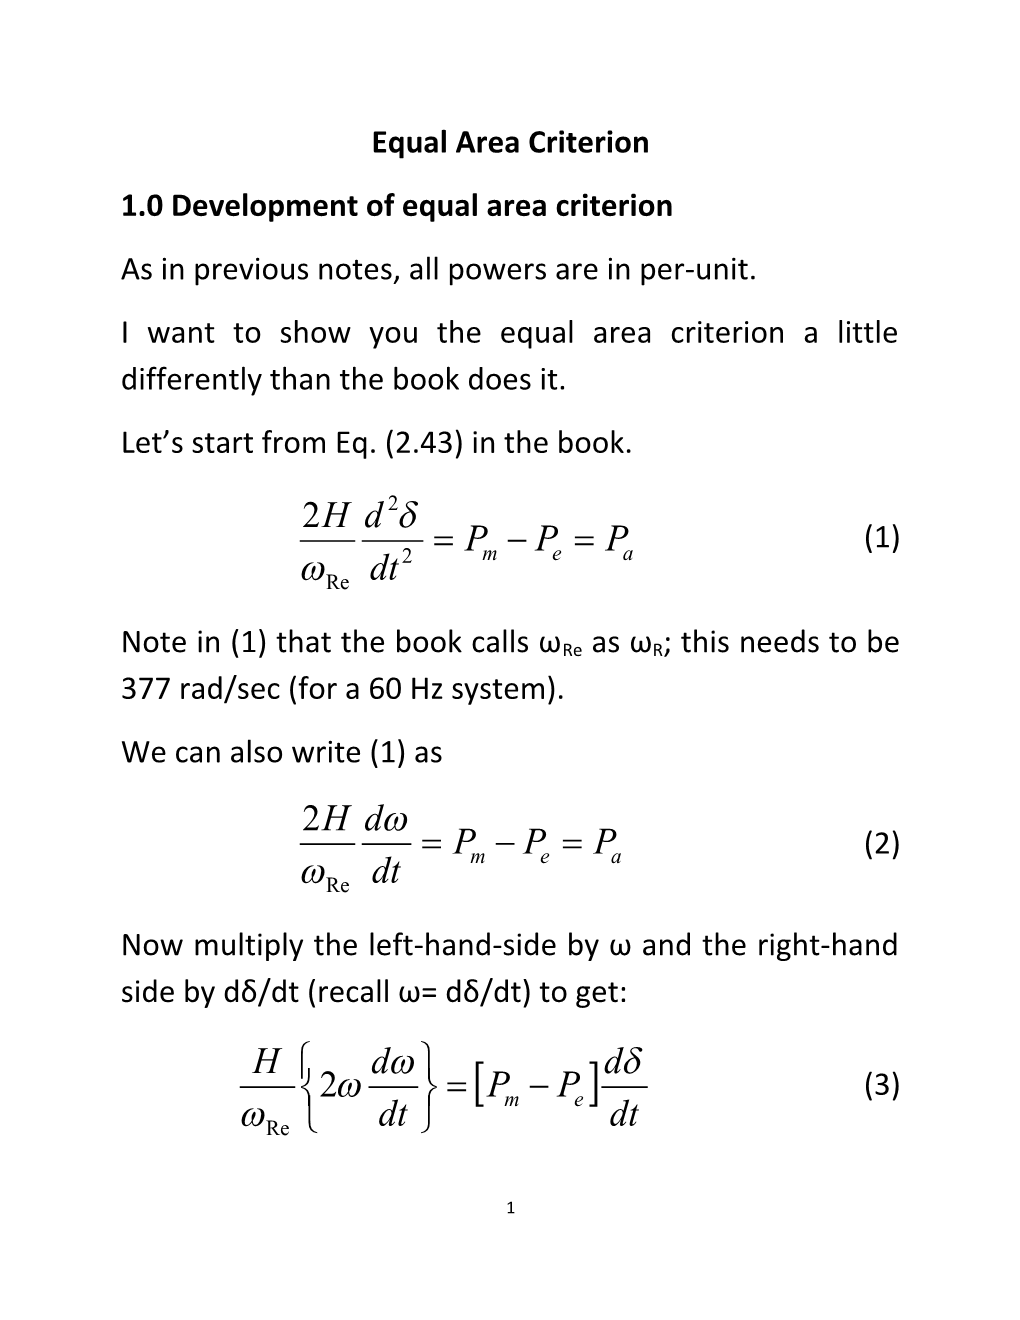 1.0 Development of Equal Area Criterion